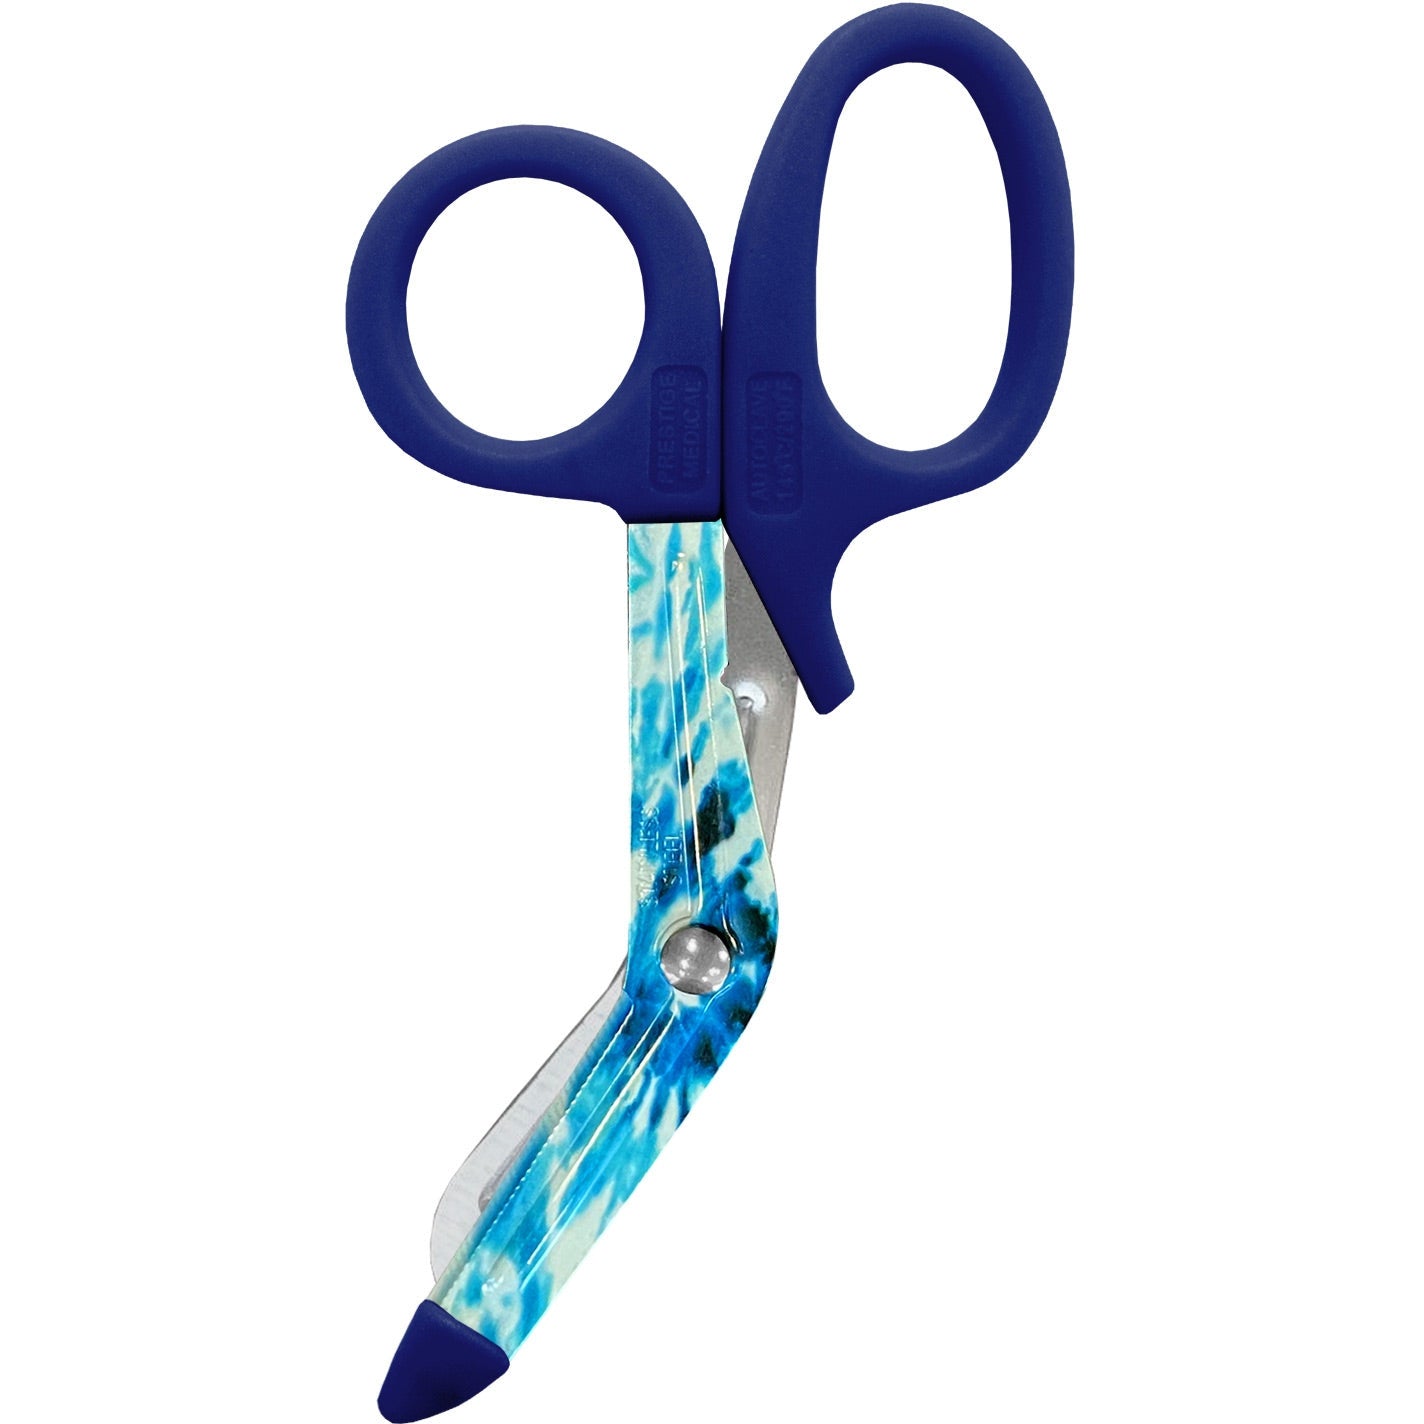 5.5" StyleMate Utility Scissors - Tie Dye Cool Blue